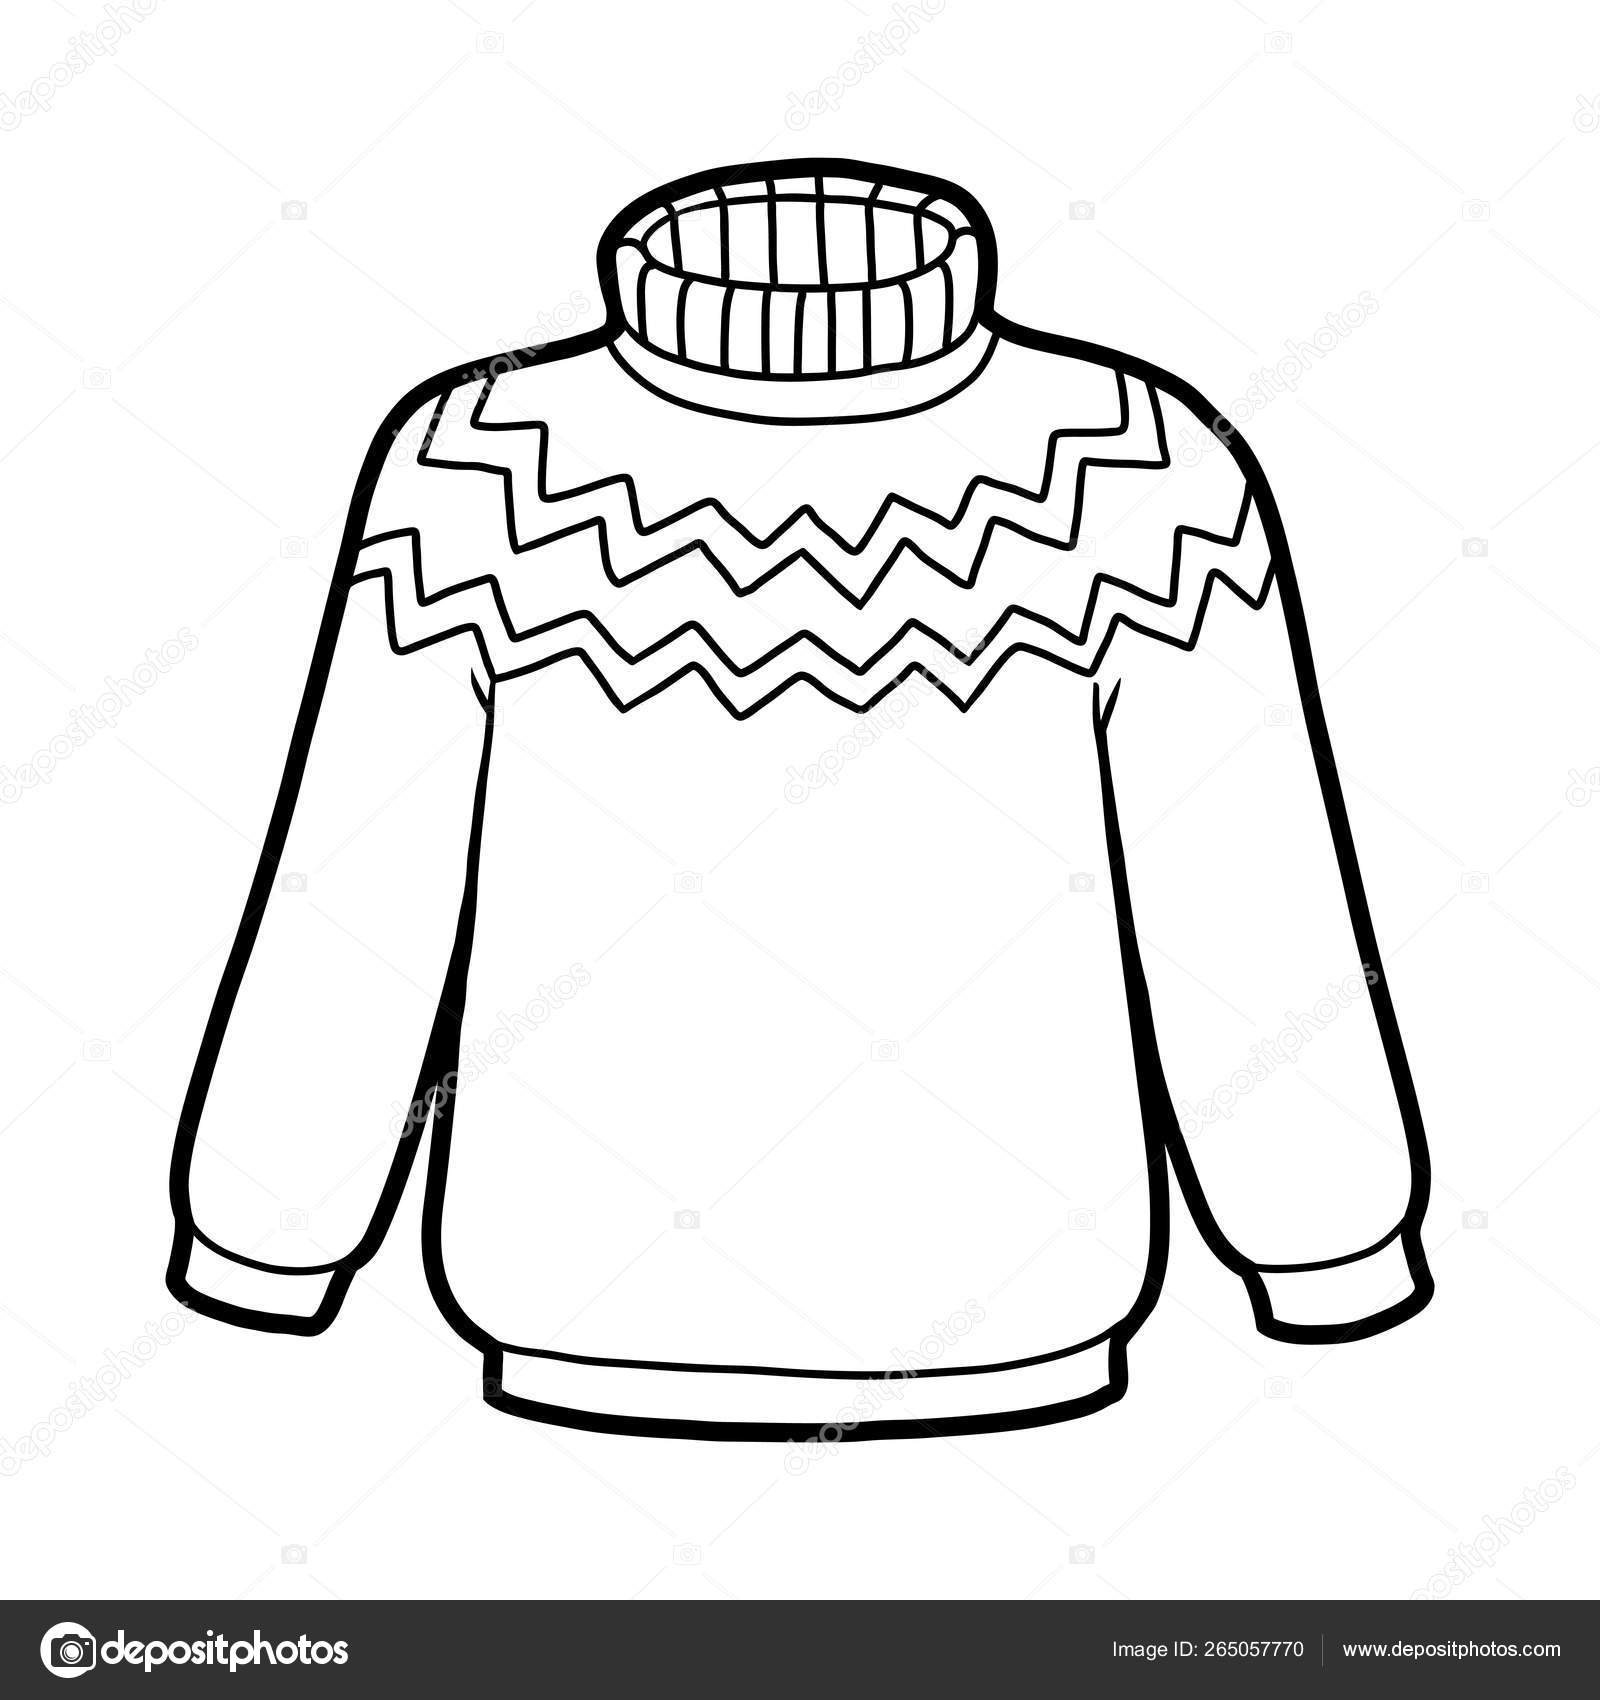 Sweater Printable - Printable Word Searches